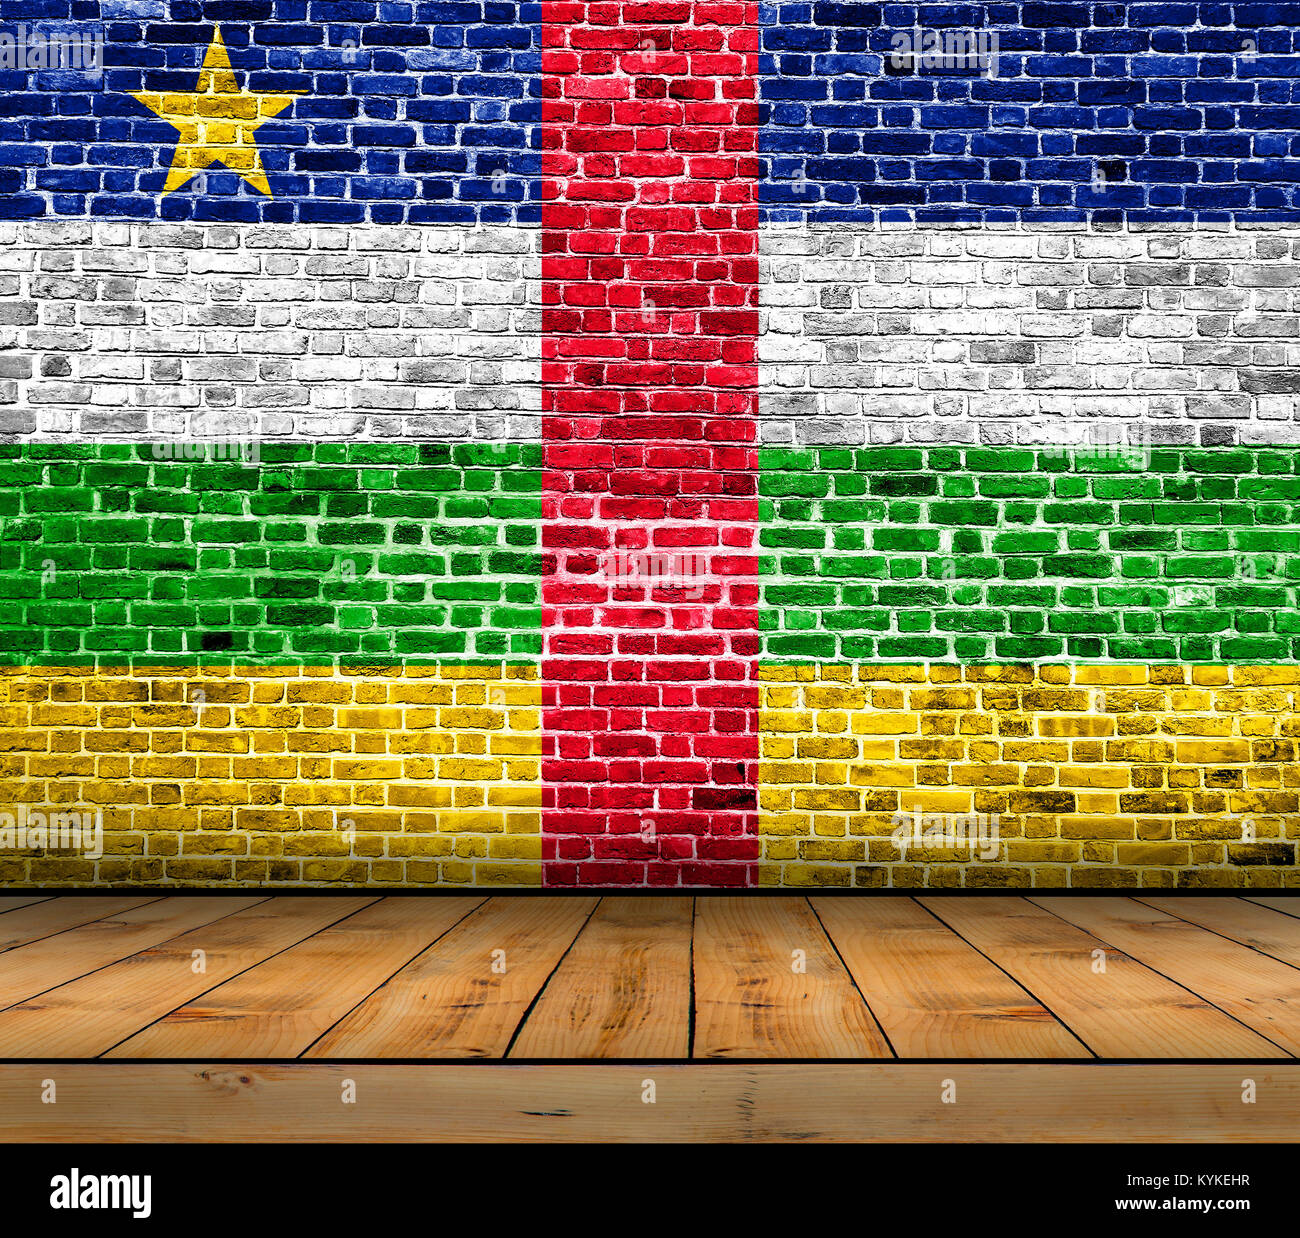 Central African Republic flag painted on brick wall with wooden floor Stock Photo